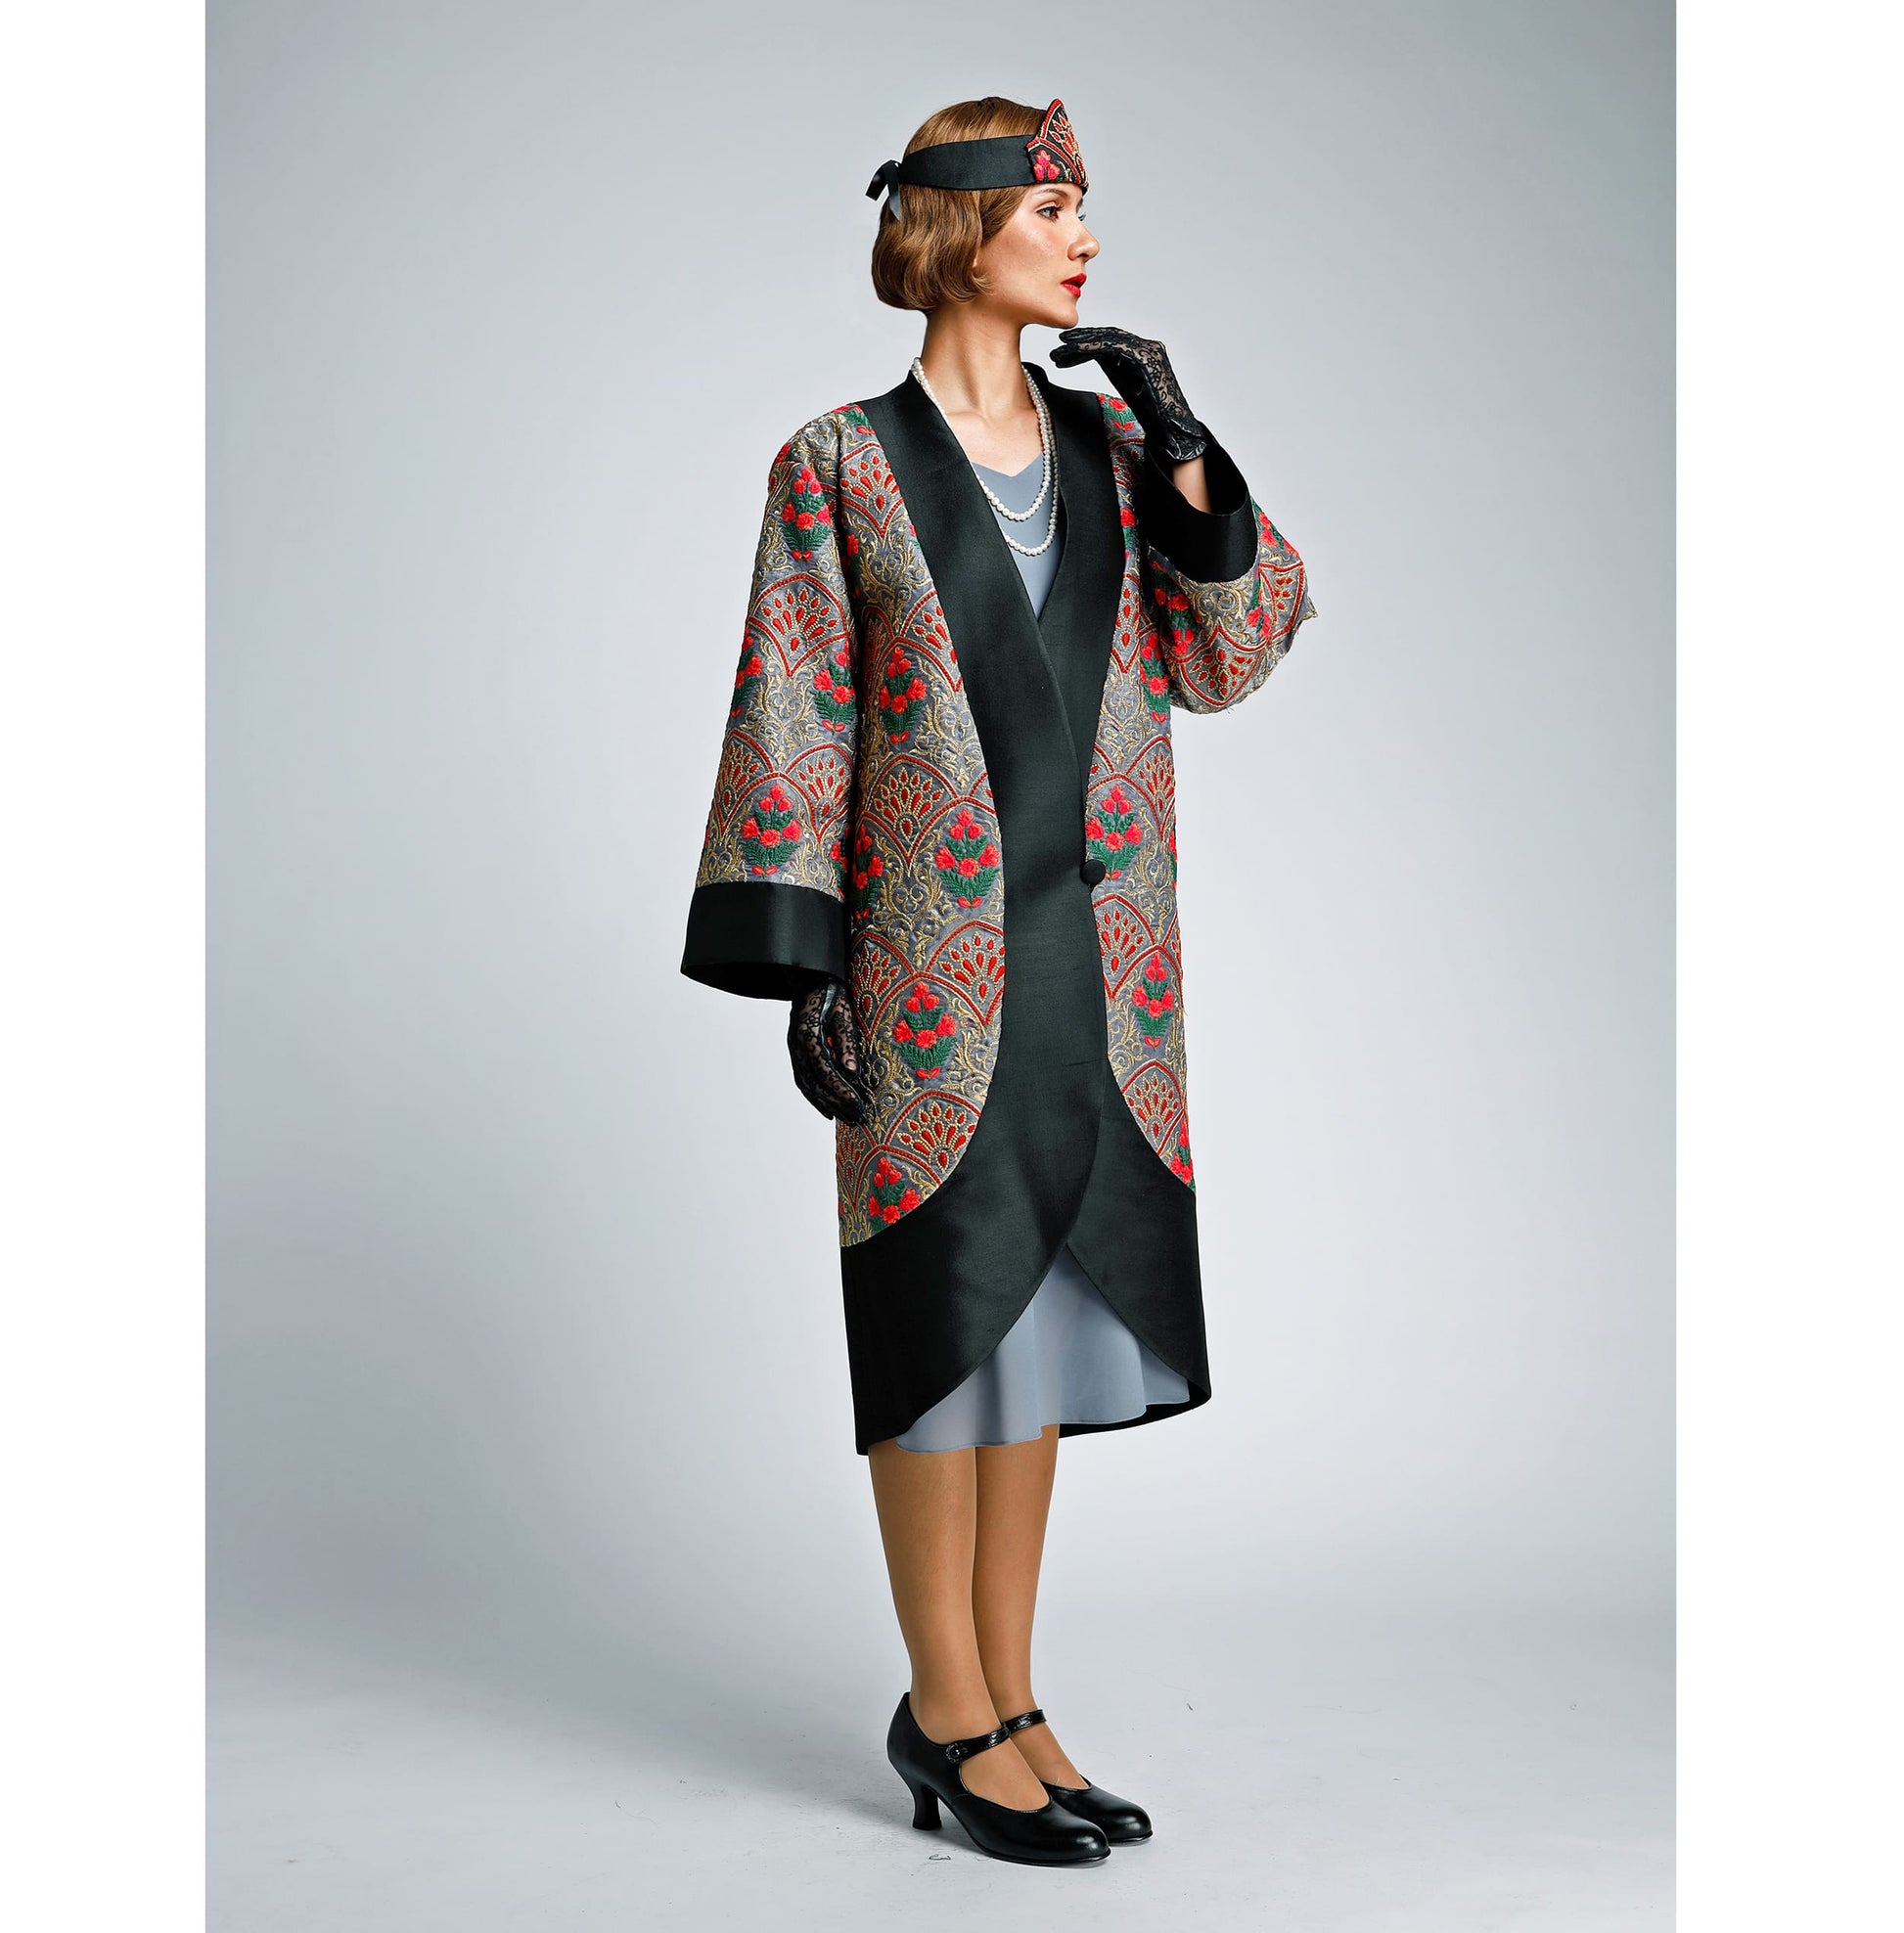 Great Gatsby coat from art deco embroidered silk with grey background. This art deco coat can be worn as an 1920s coat, kimono jacket or cocoon coat